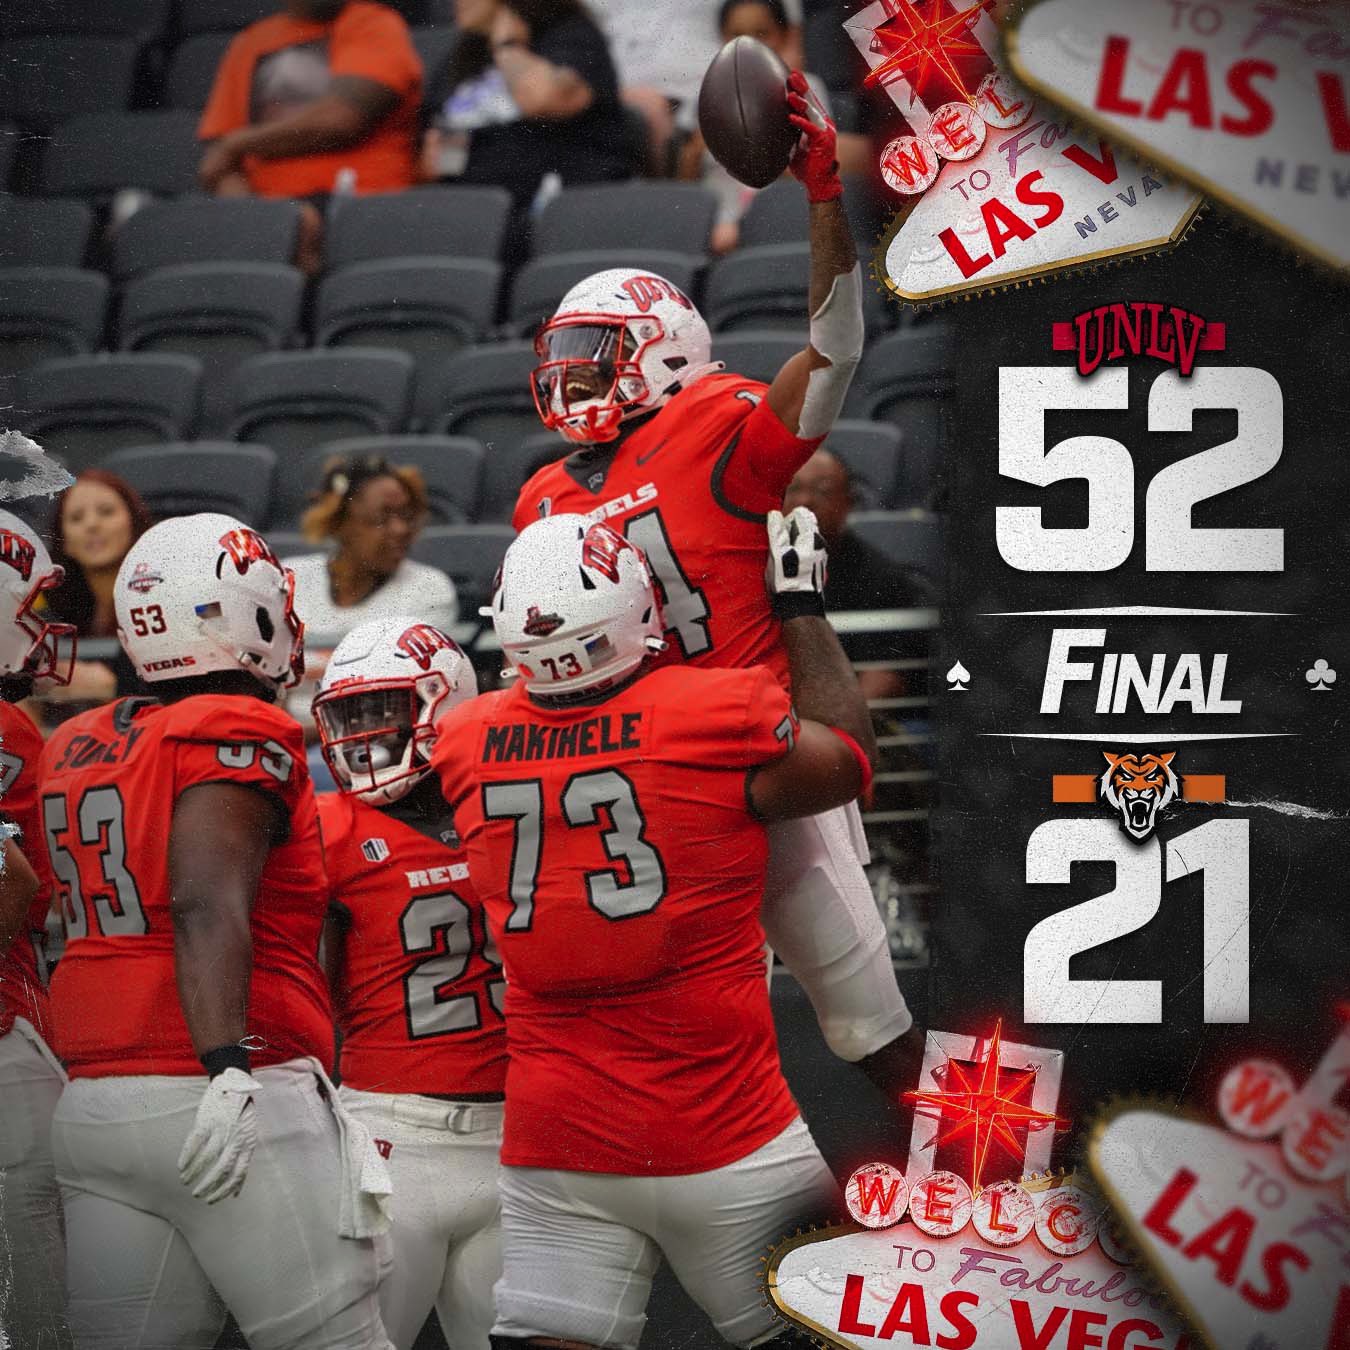 In this social media post by UNLV football, receiver Zyell Griffin celebrates catching a touchdown in a 52-21 win over Idaho State.